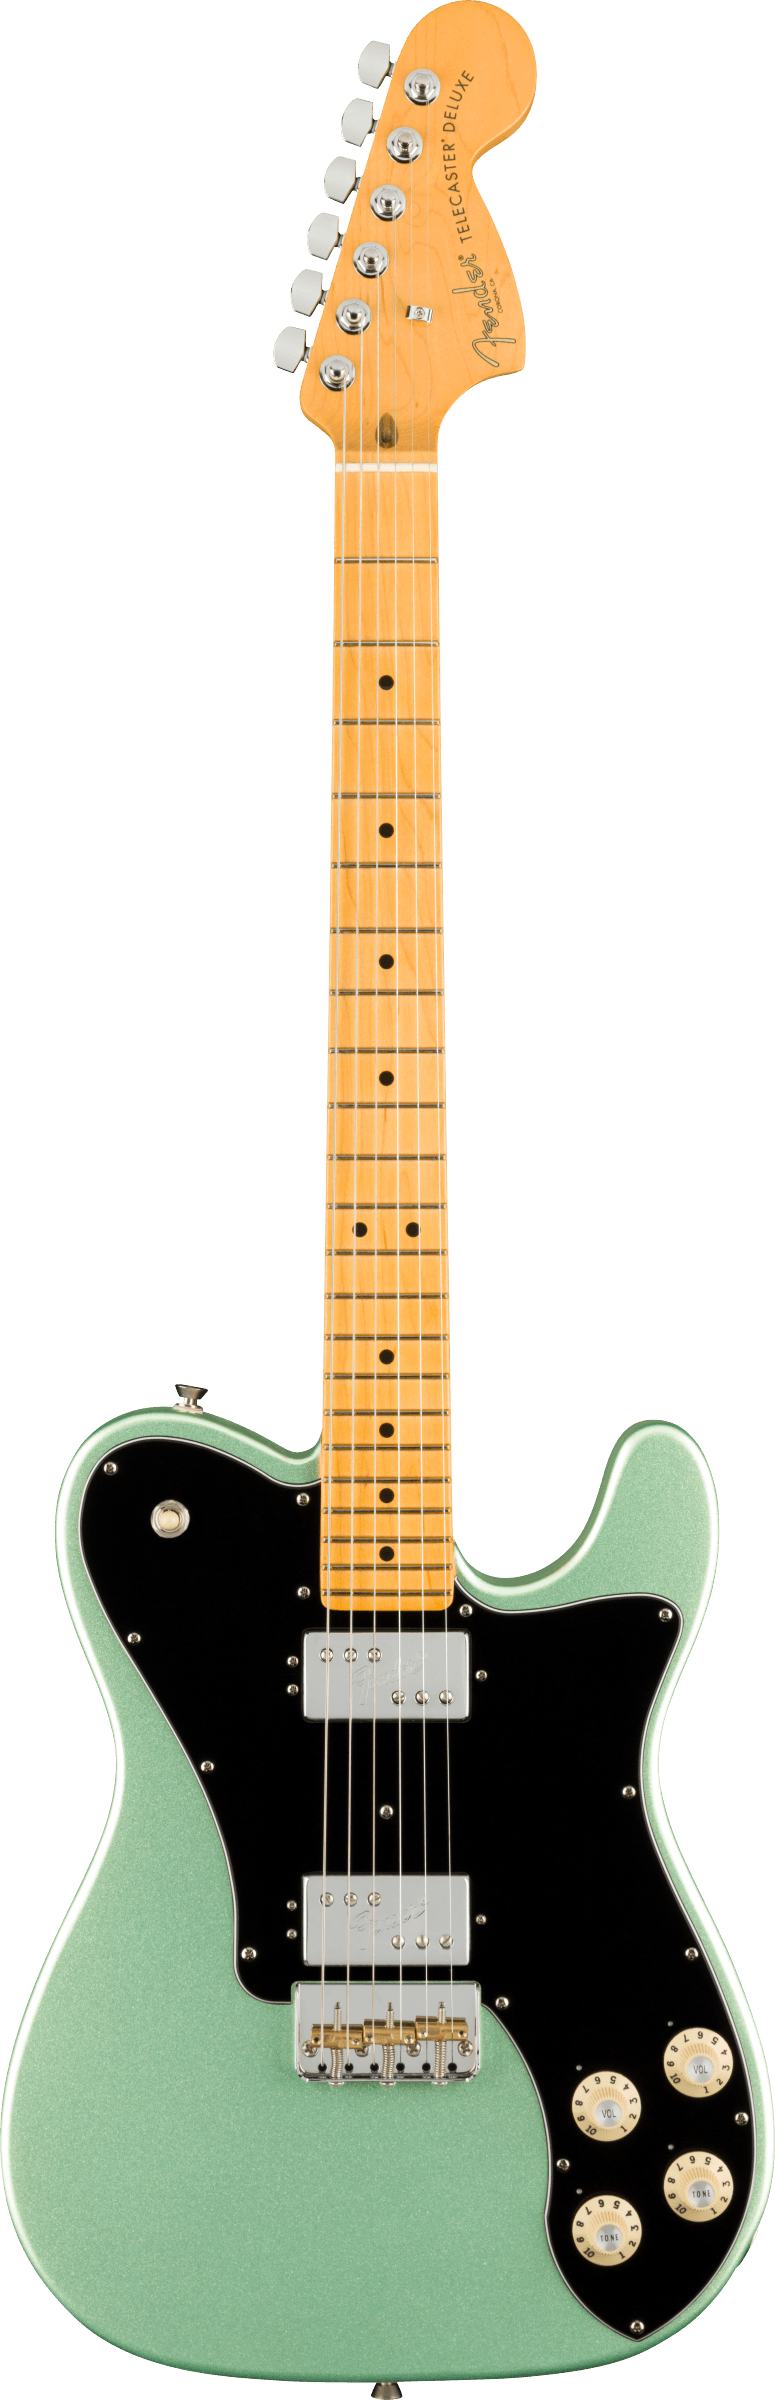 American Professional II Telecaster Deluxe Maple Fingerboard, Mystic Surf Green